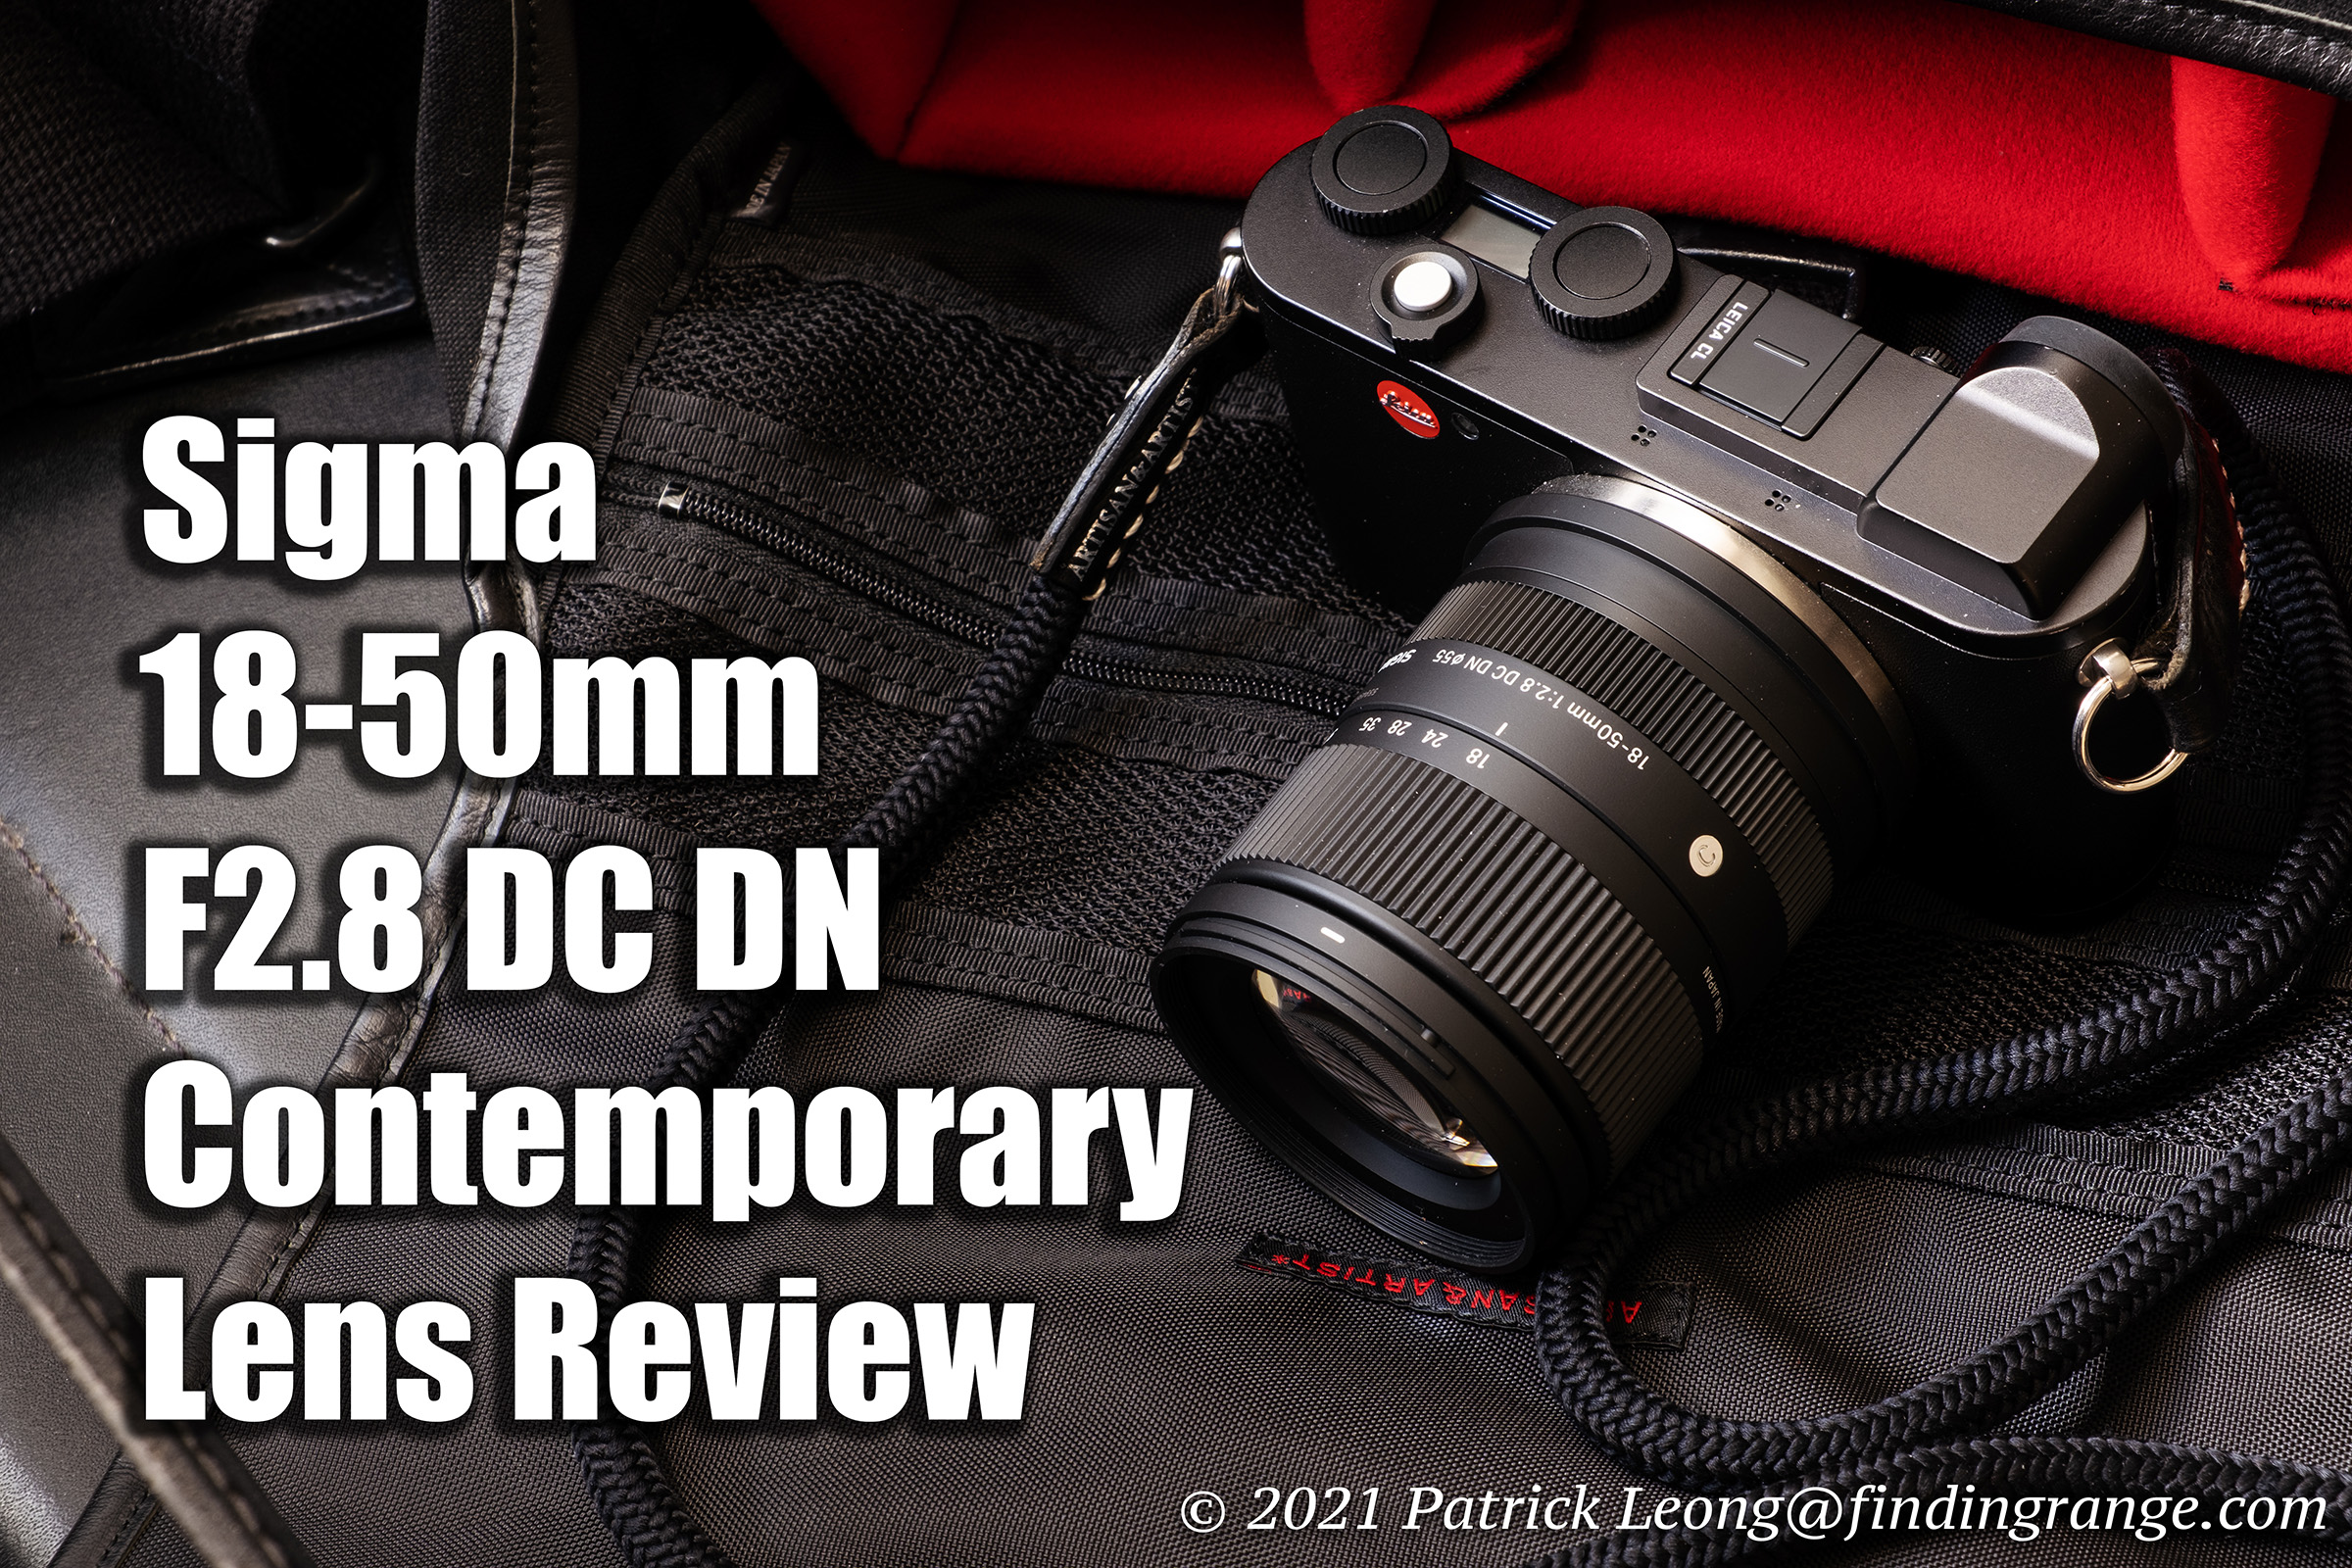 Sigma 18-50mm F2.8 DC DN Contemporary Lens Review - Finding Range